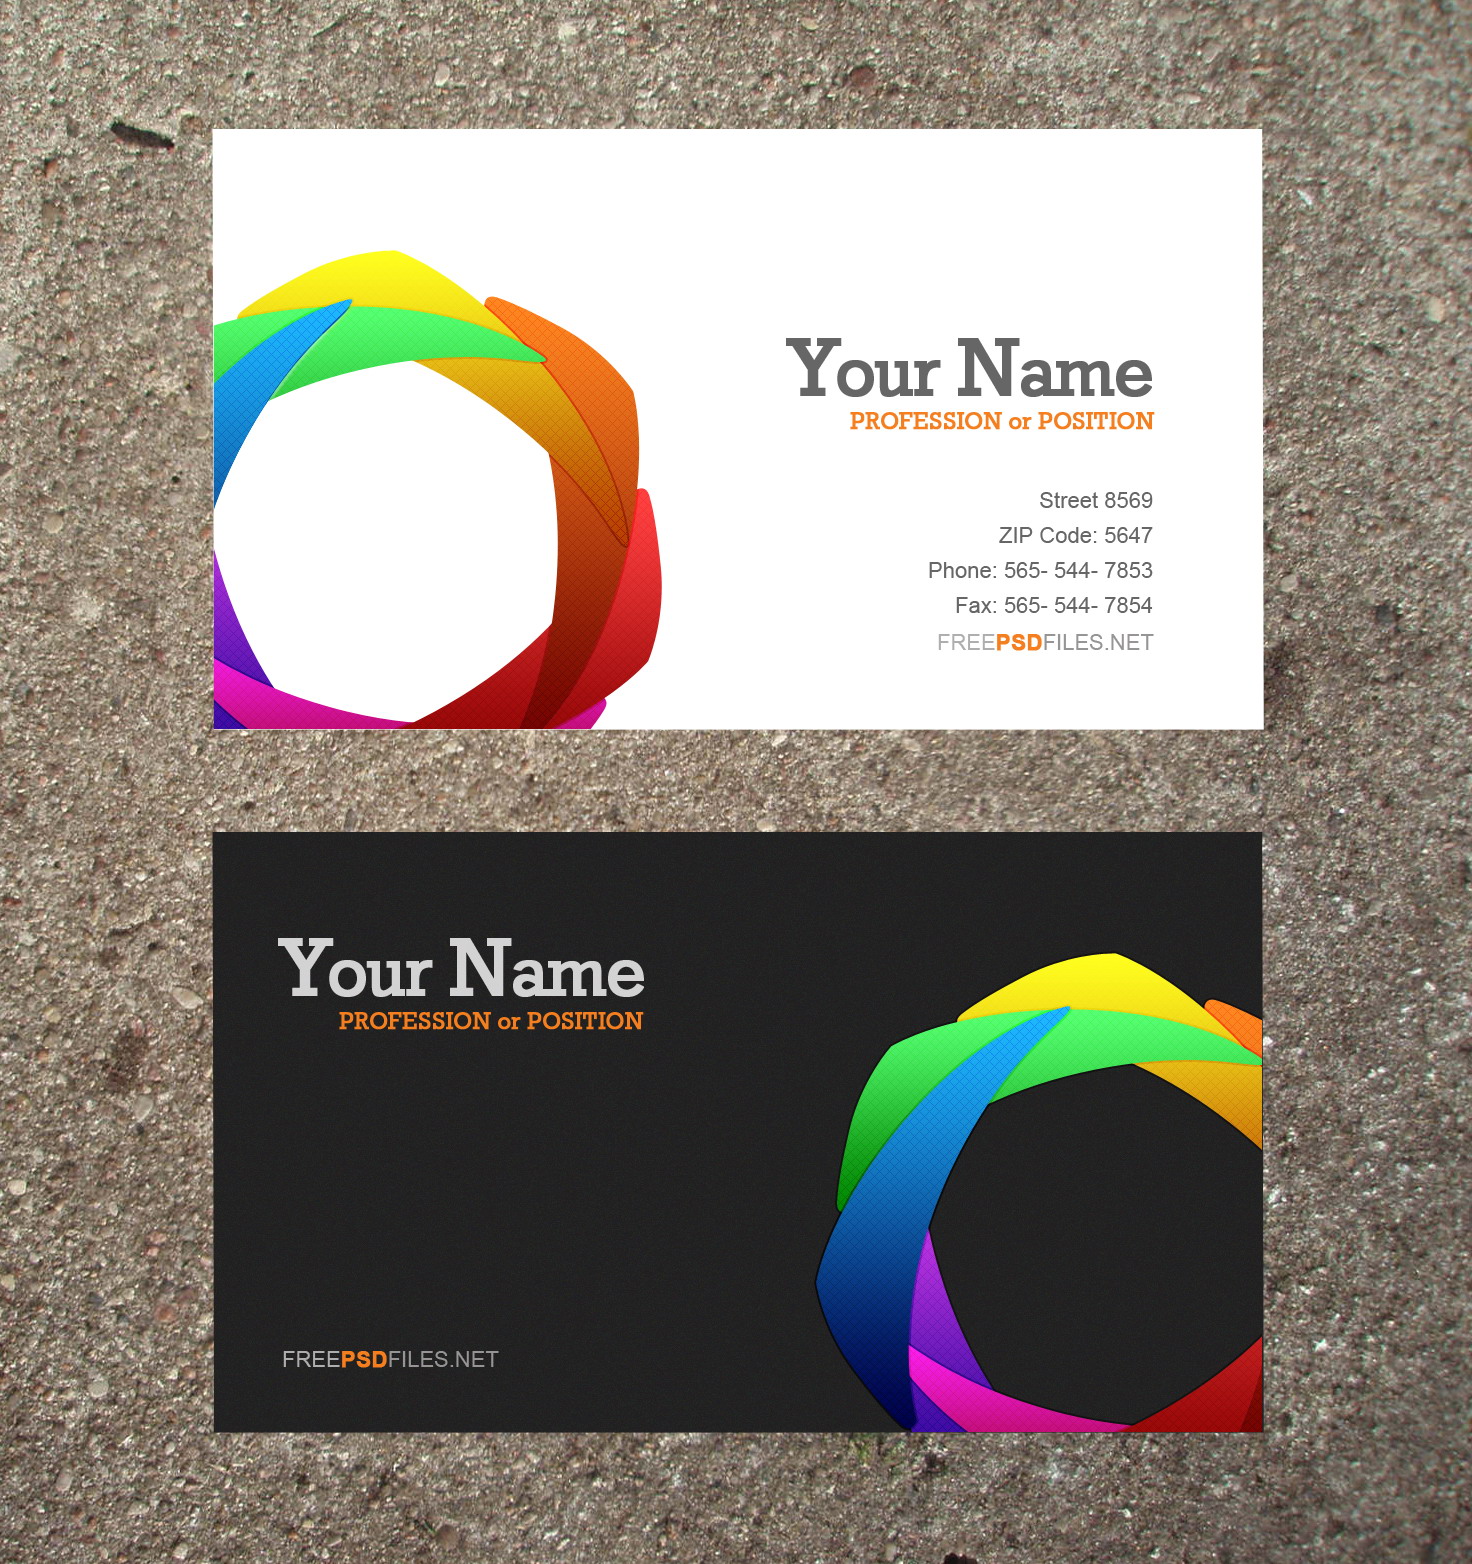 Make Own Business Cards Online Free Design Your Own Business Cards Using Picmonkey And Vista